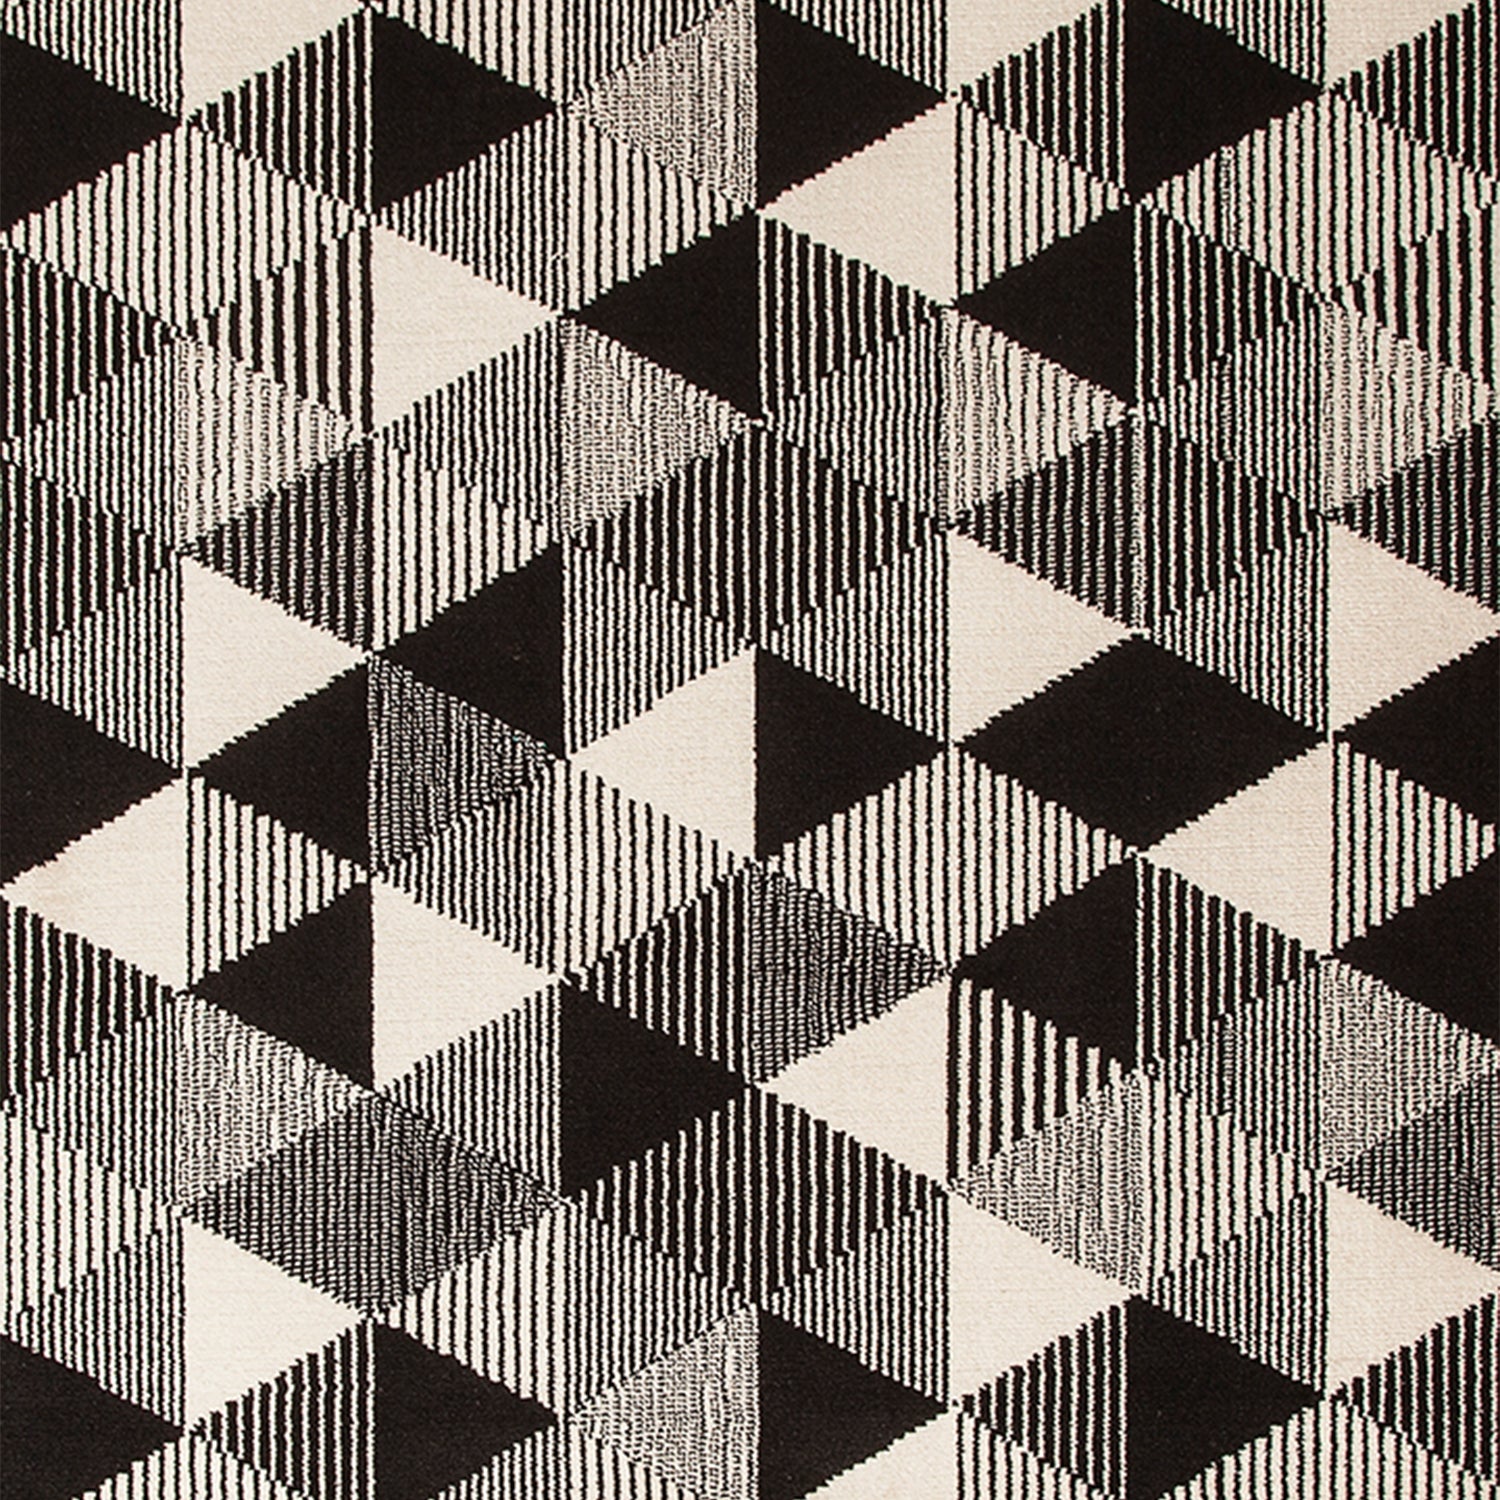 Wool-silk broadloom carpet swatch in a repeating triangle print in black and cream.